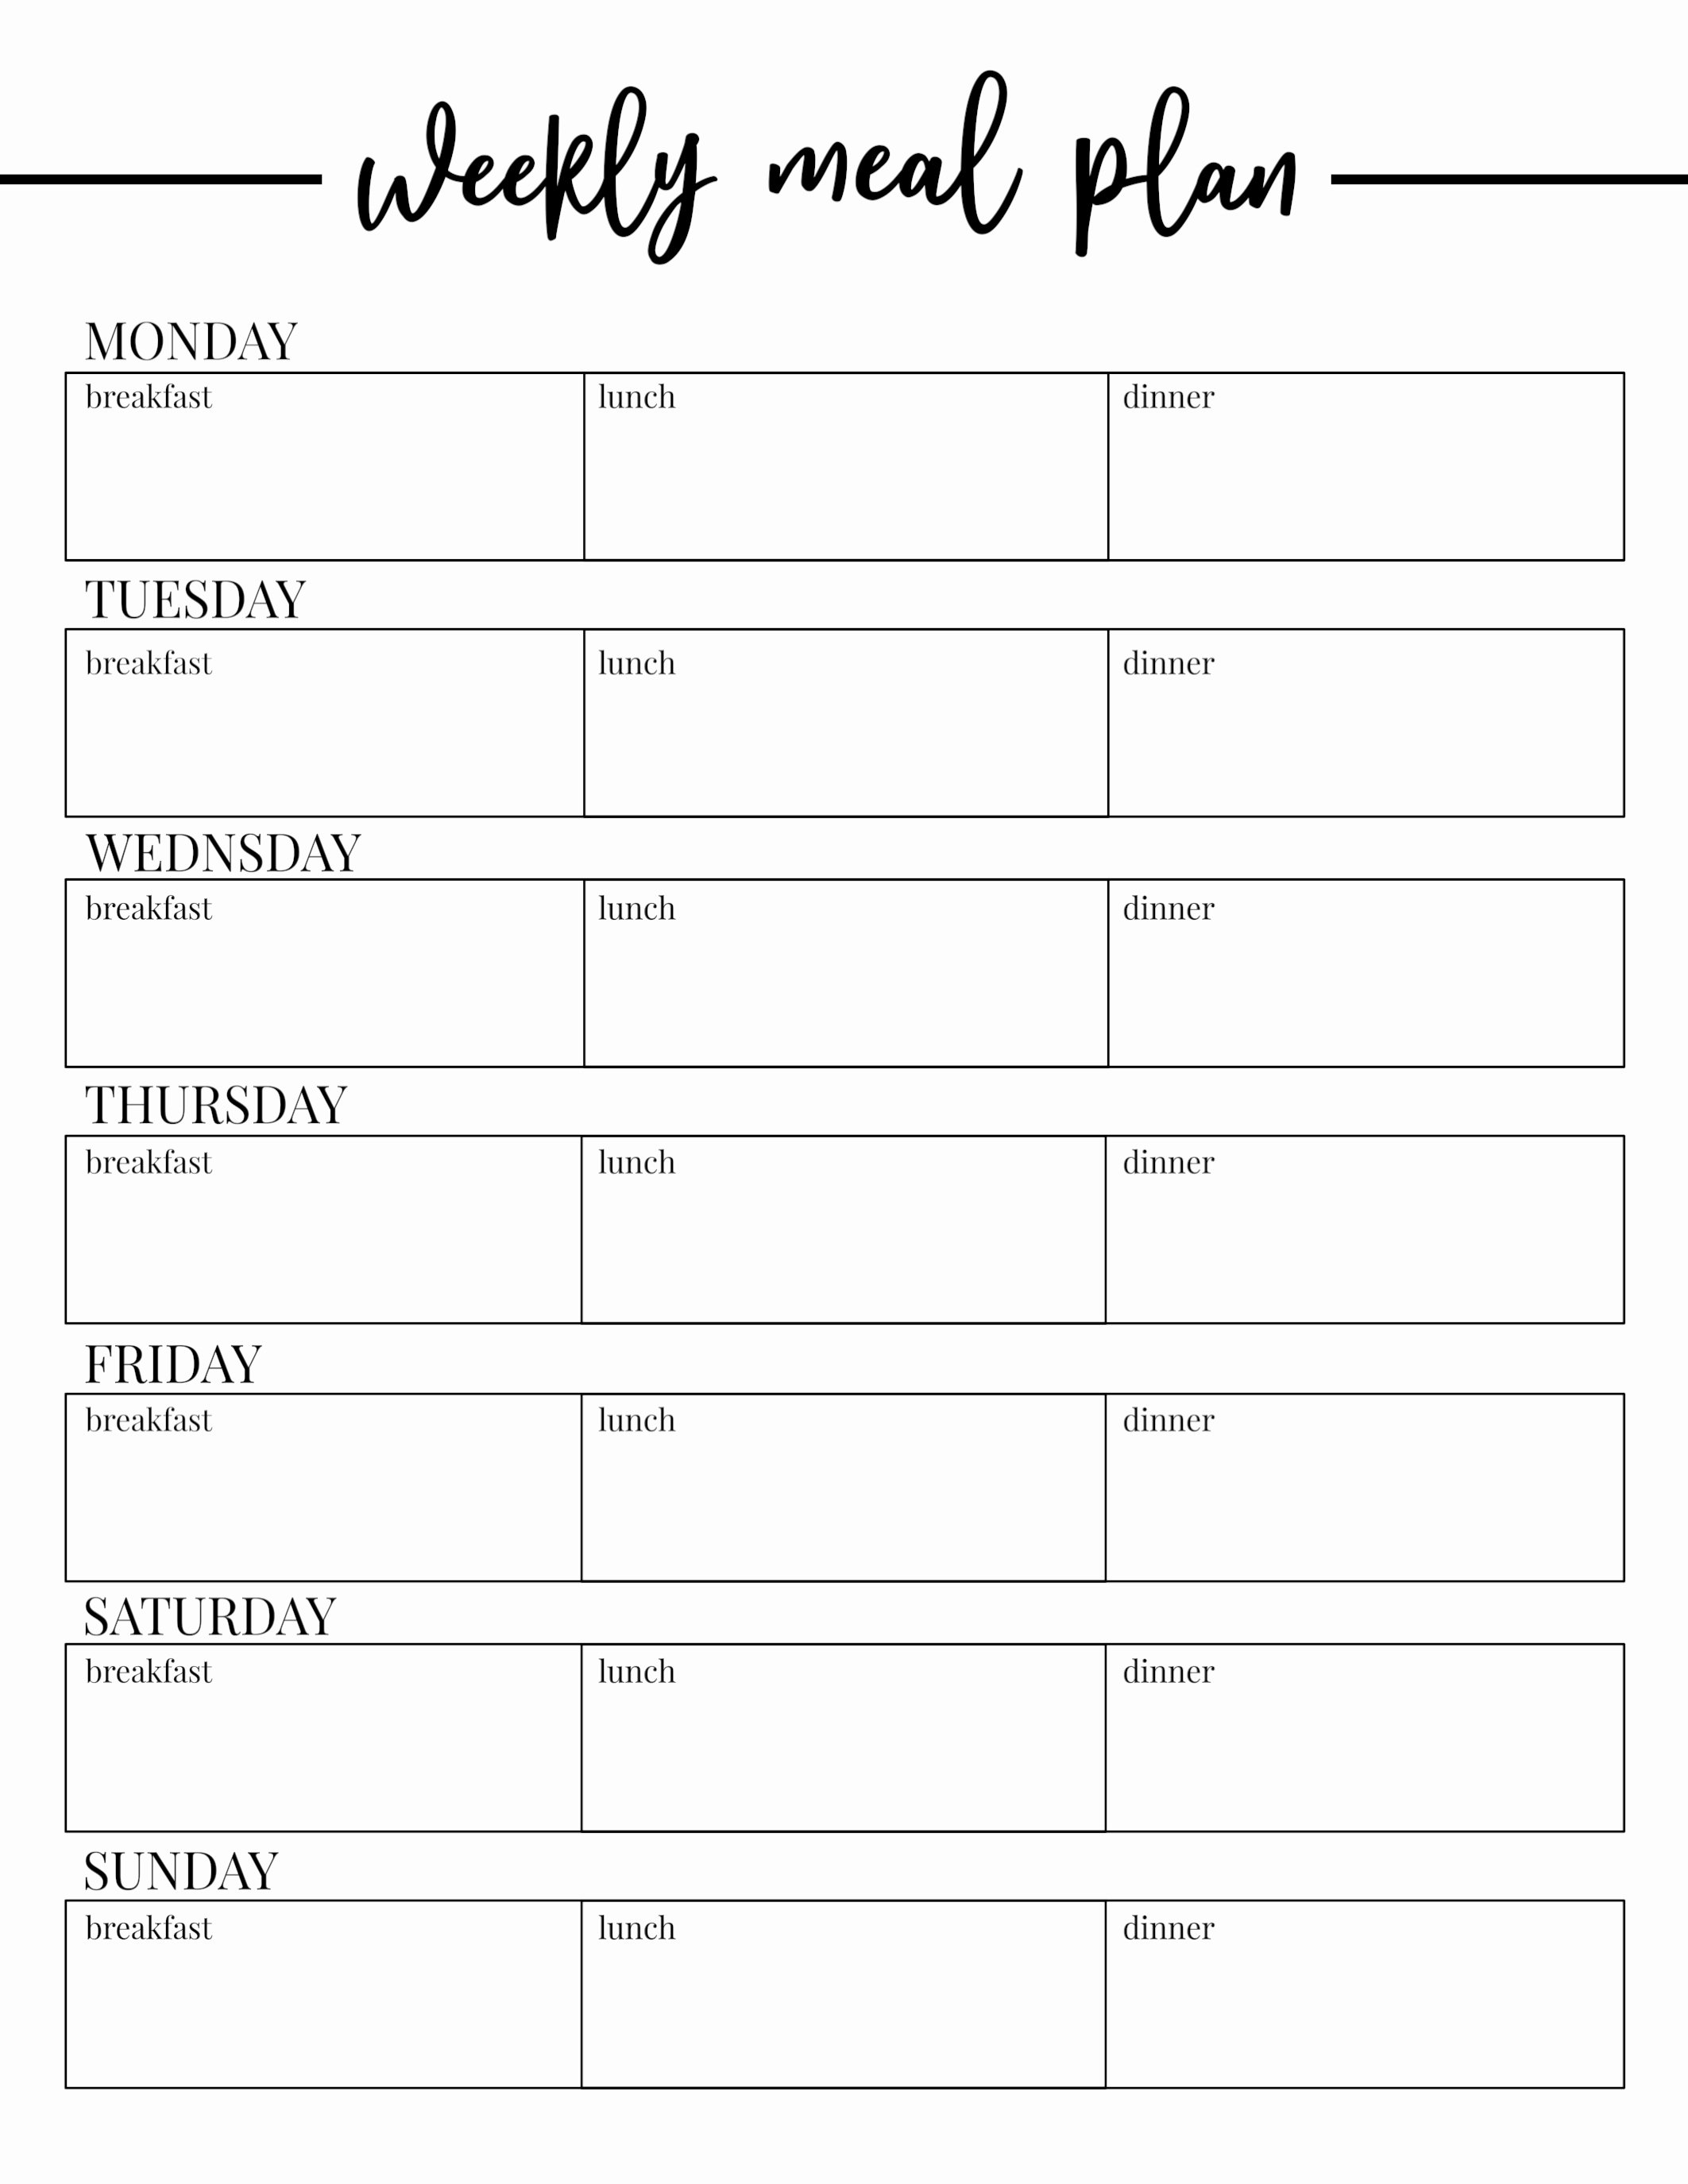 Monthly Meal Plan Template Luxury Free Printable Weekly Meal Plan Template Paper Trail Design